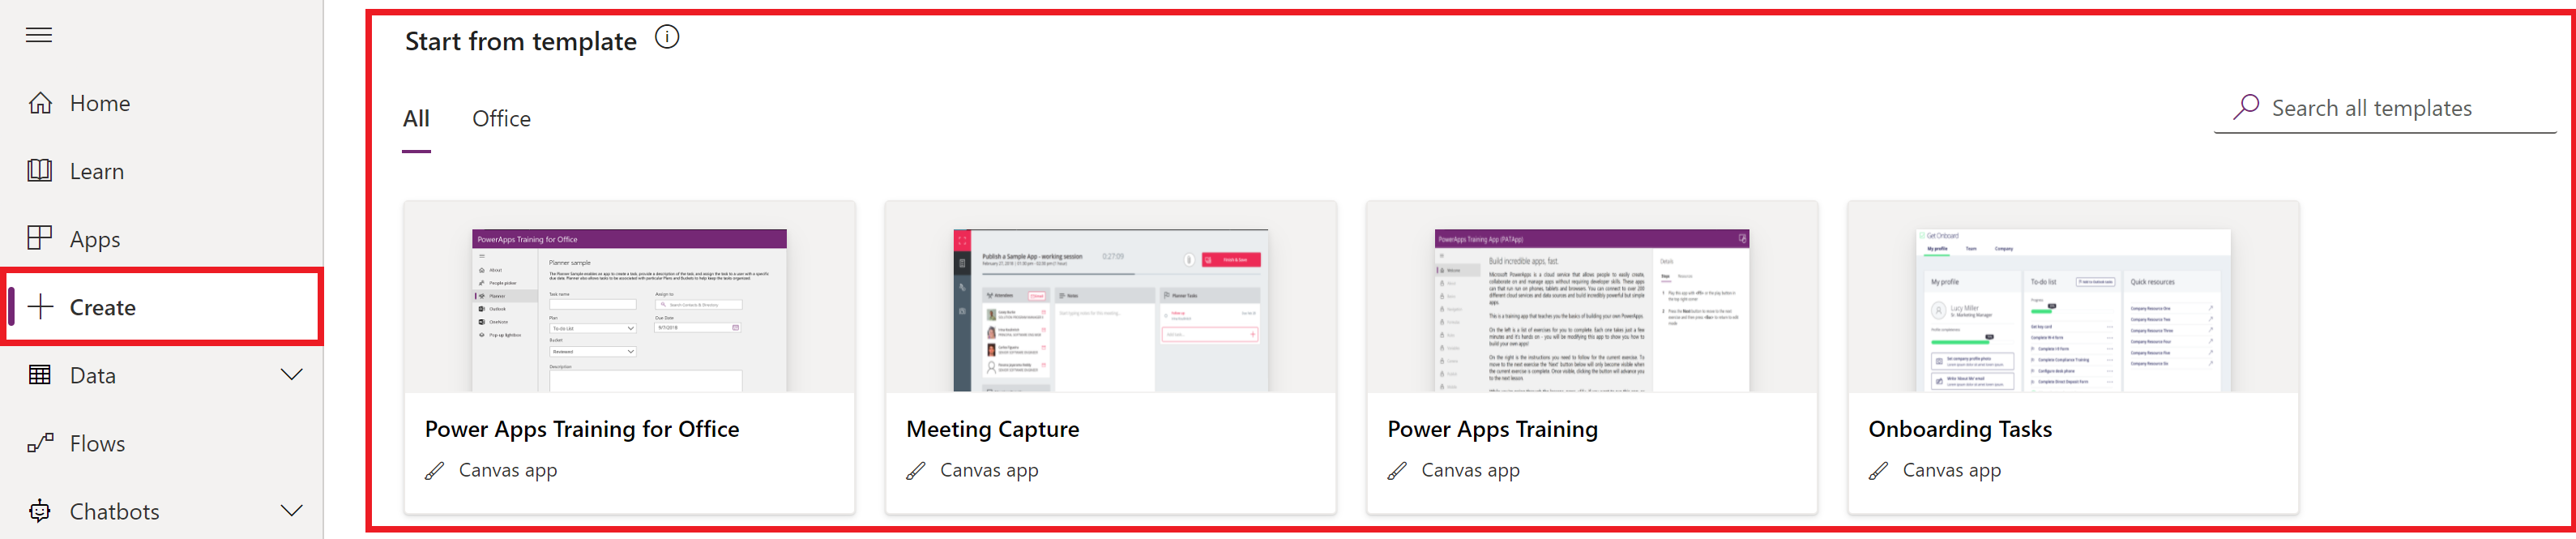 Overview of building canvas apps - Power Apps | Microsoft Learn